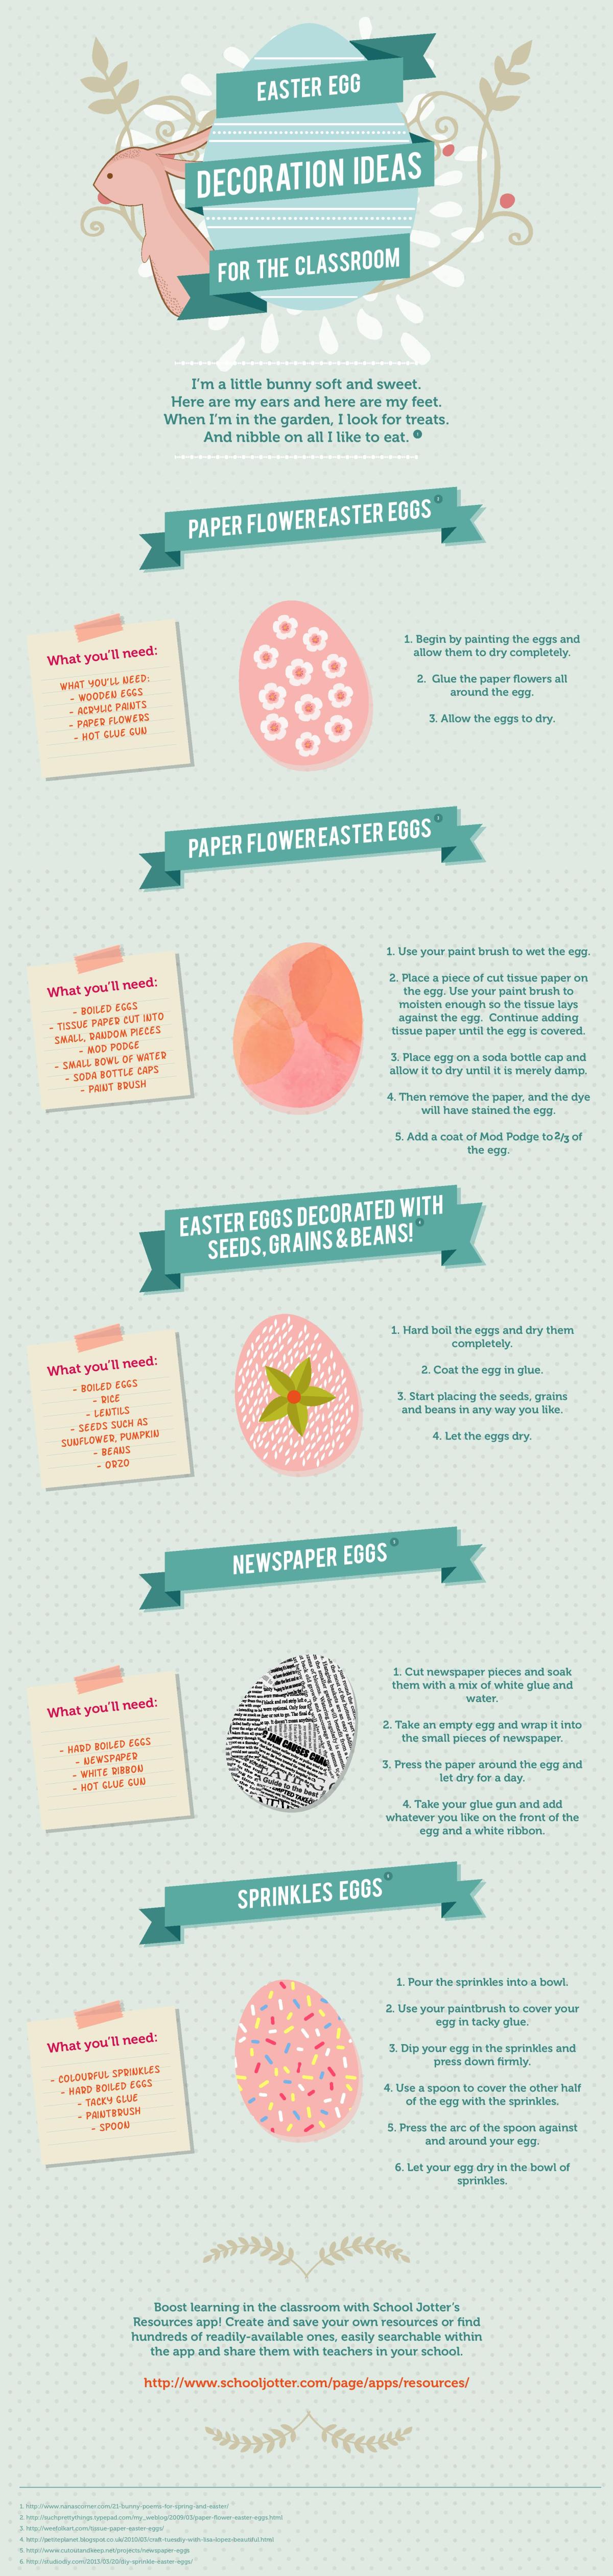 Easter Egg Decoration ideas for the Classroom [Infographic] | ecogreenlove